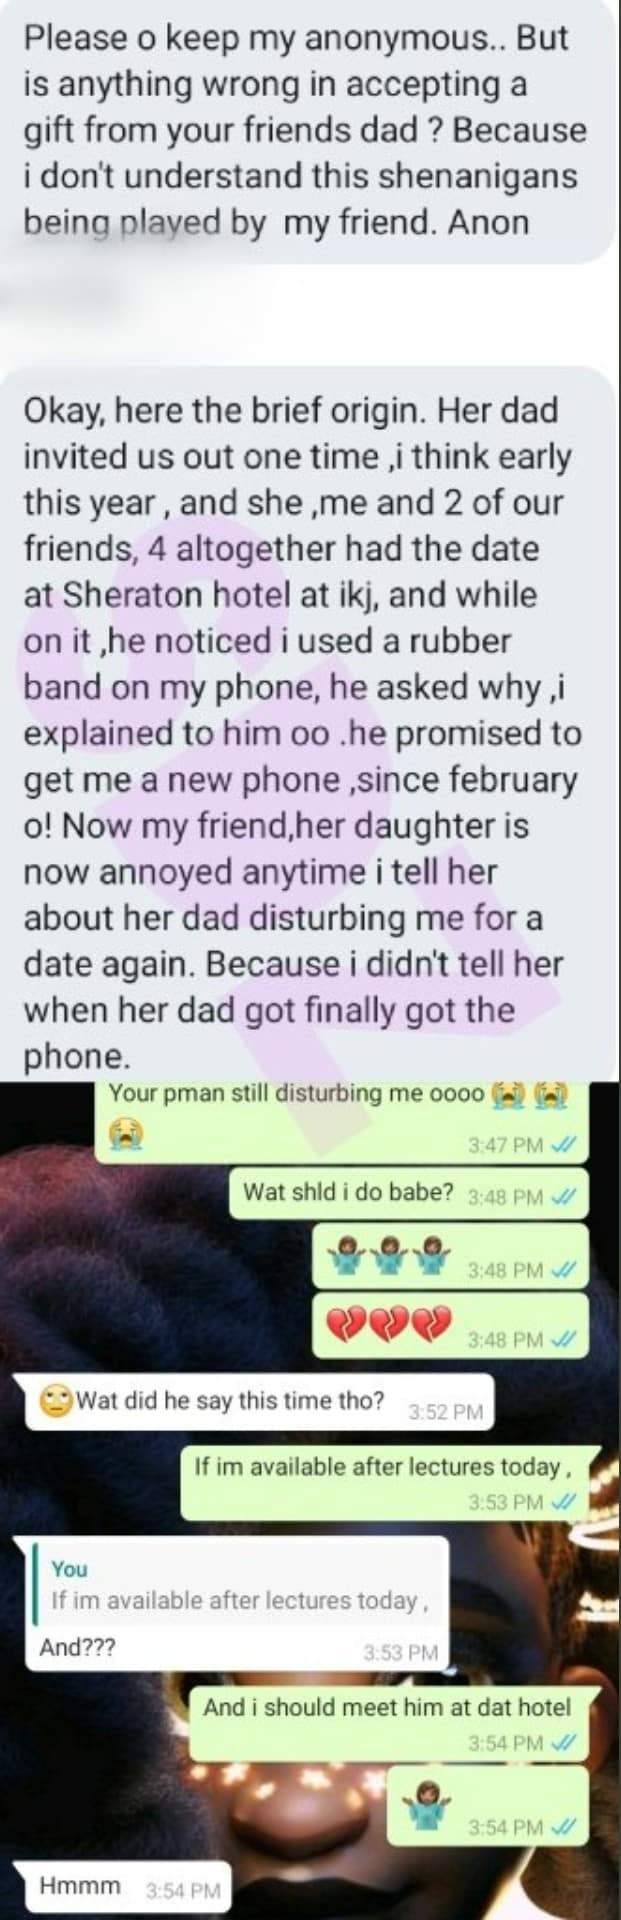 Girl slams her friend for accepting phone gift from her dad without her consent